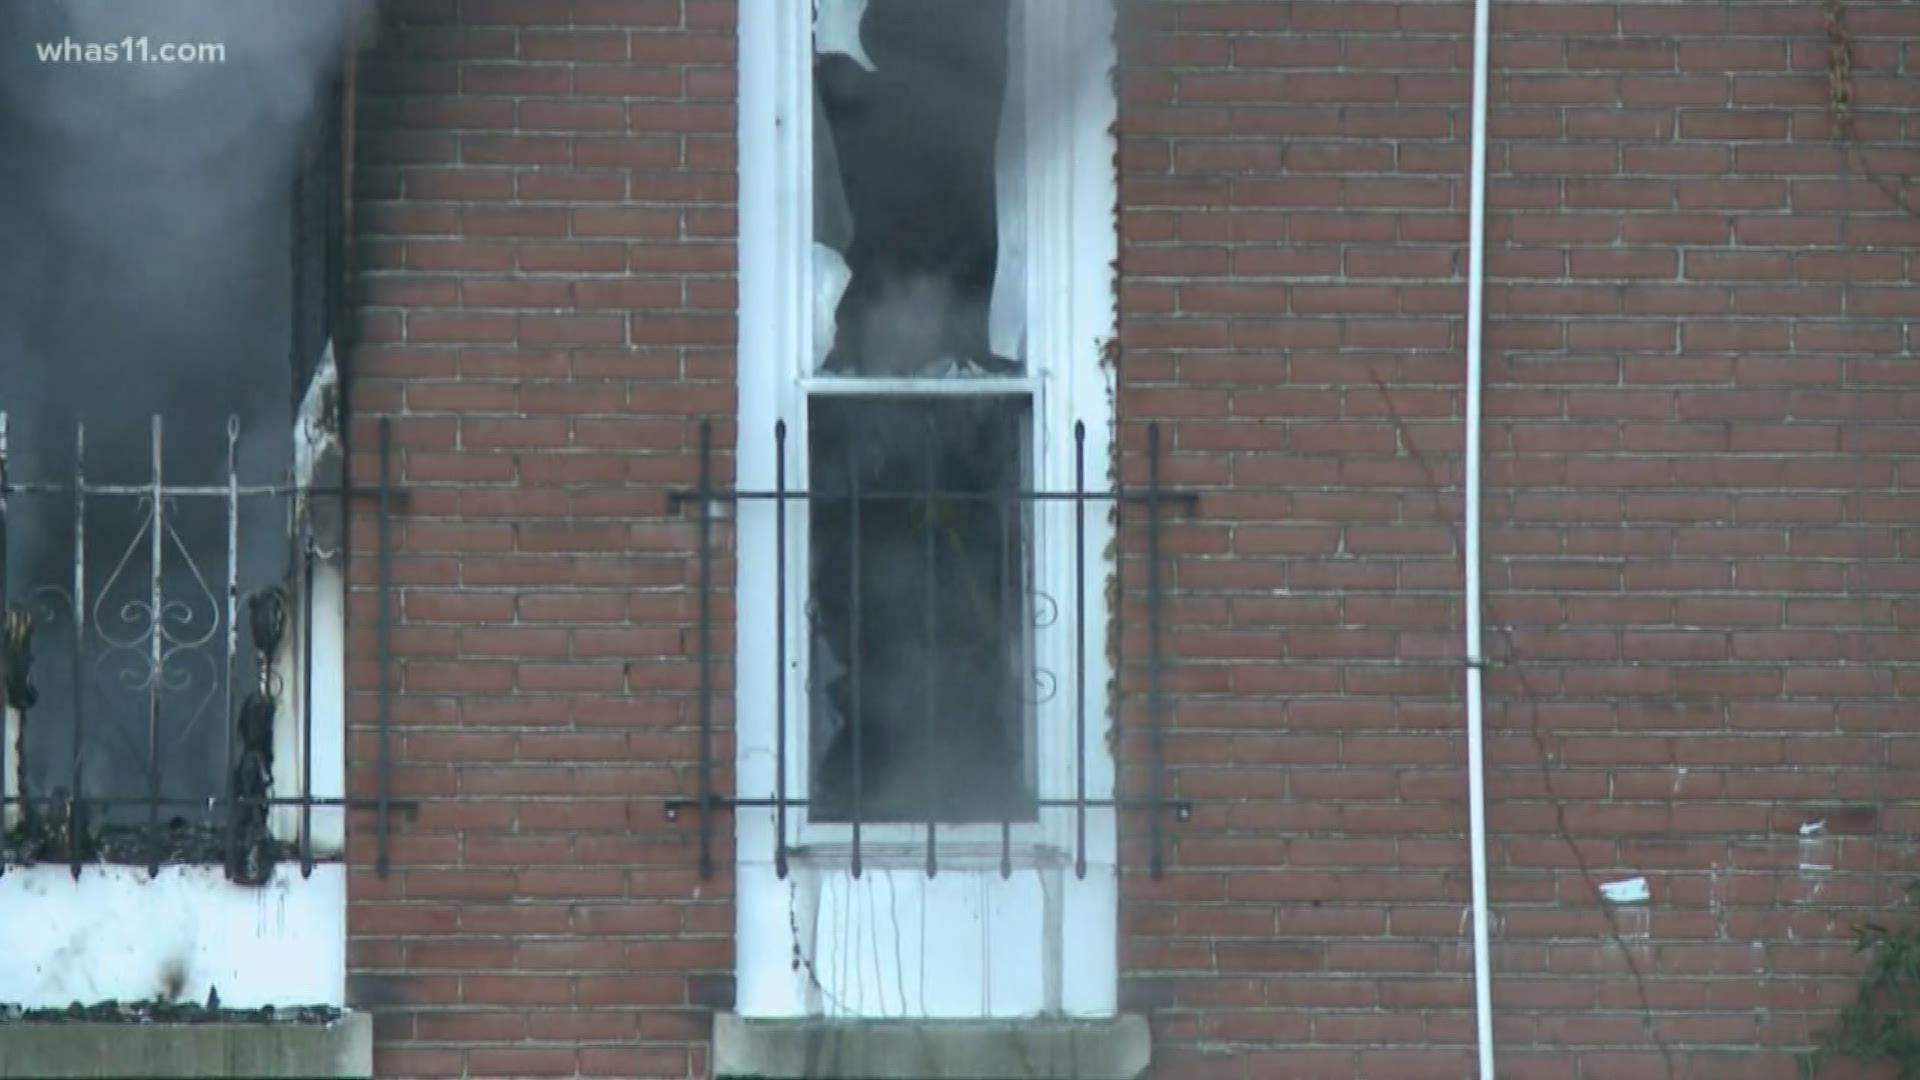 A family of four is okay after a space heater caused a fire inside a home in the 800 block of S. Floyd Street.